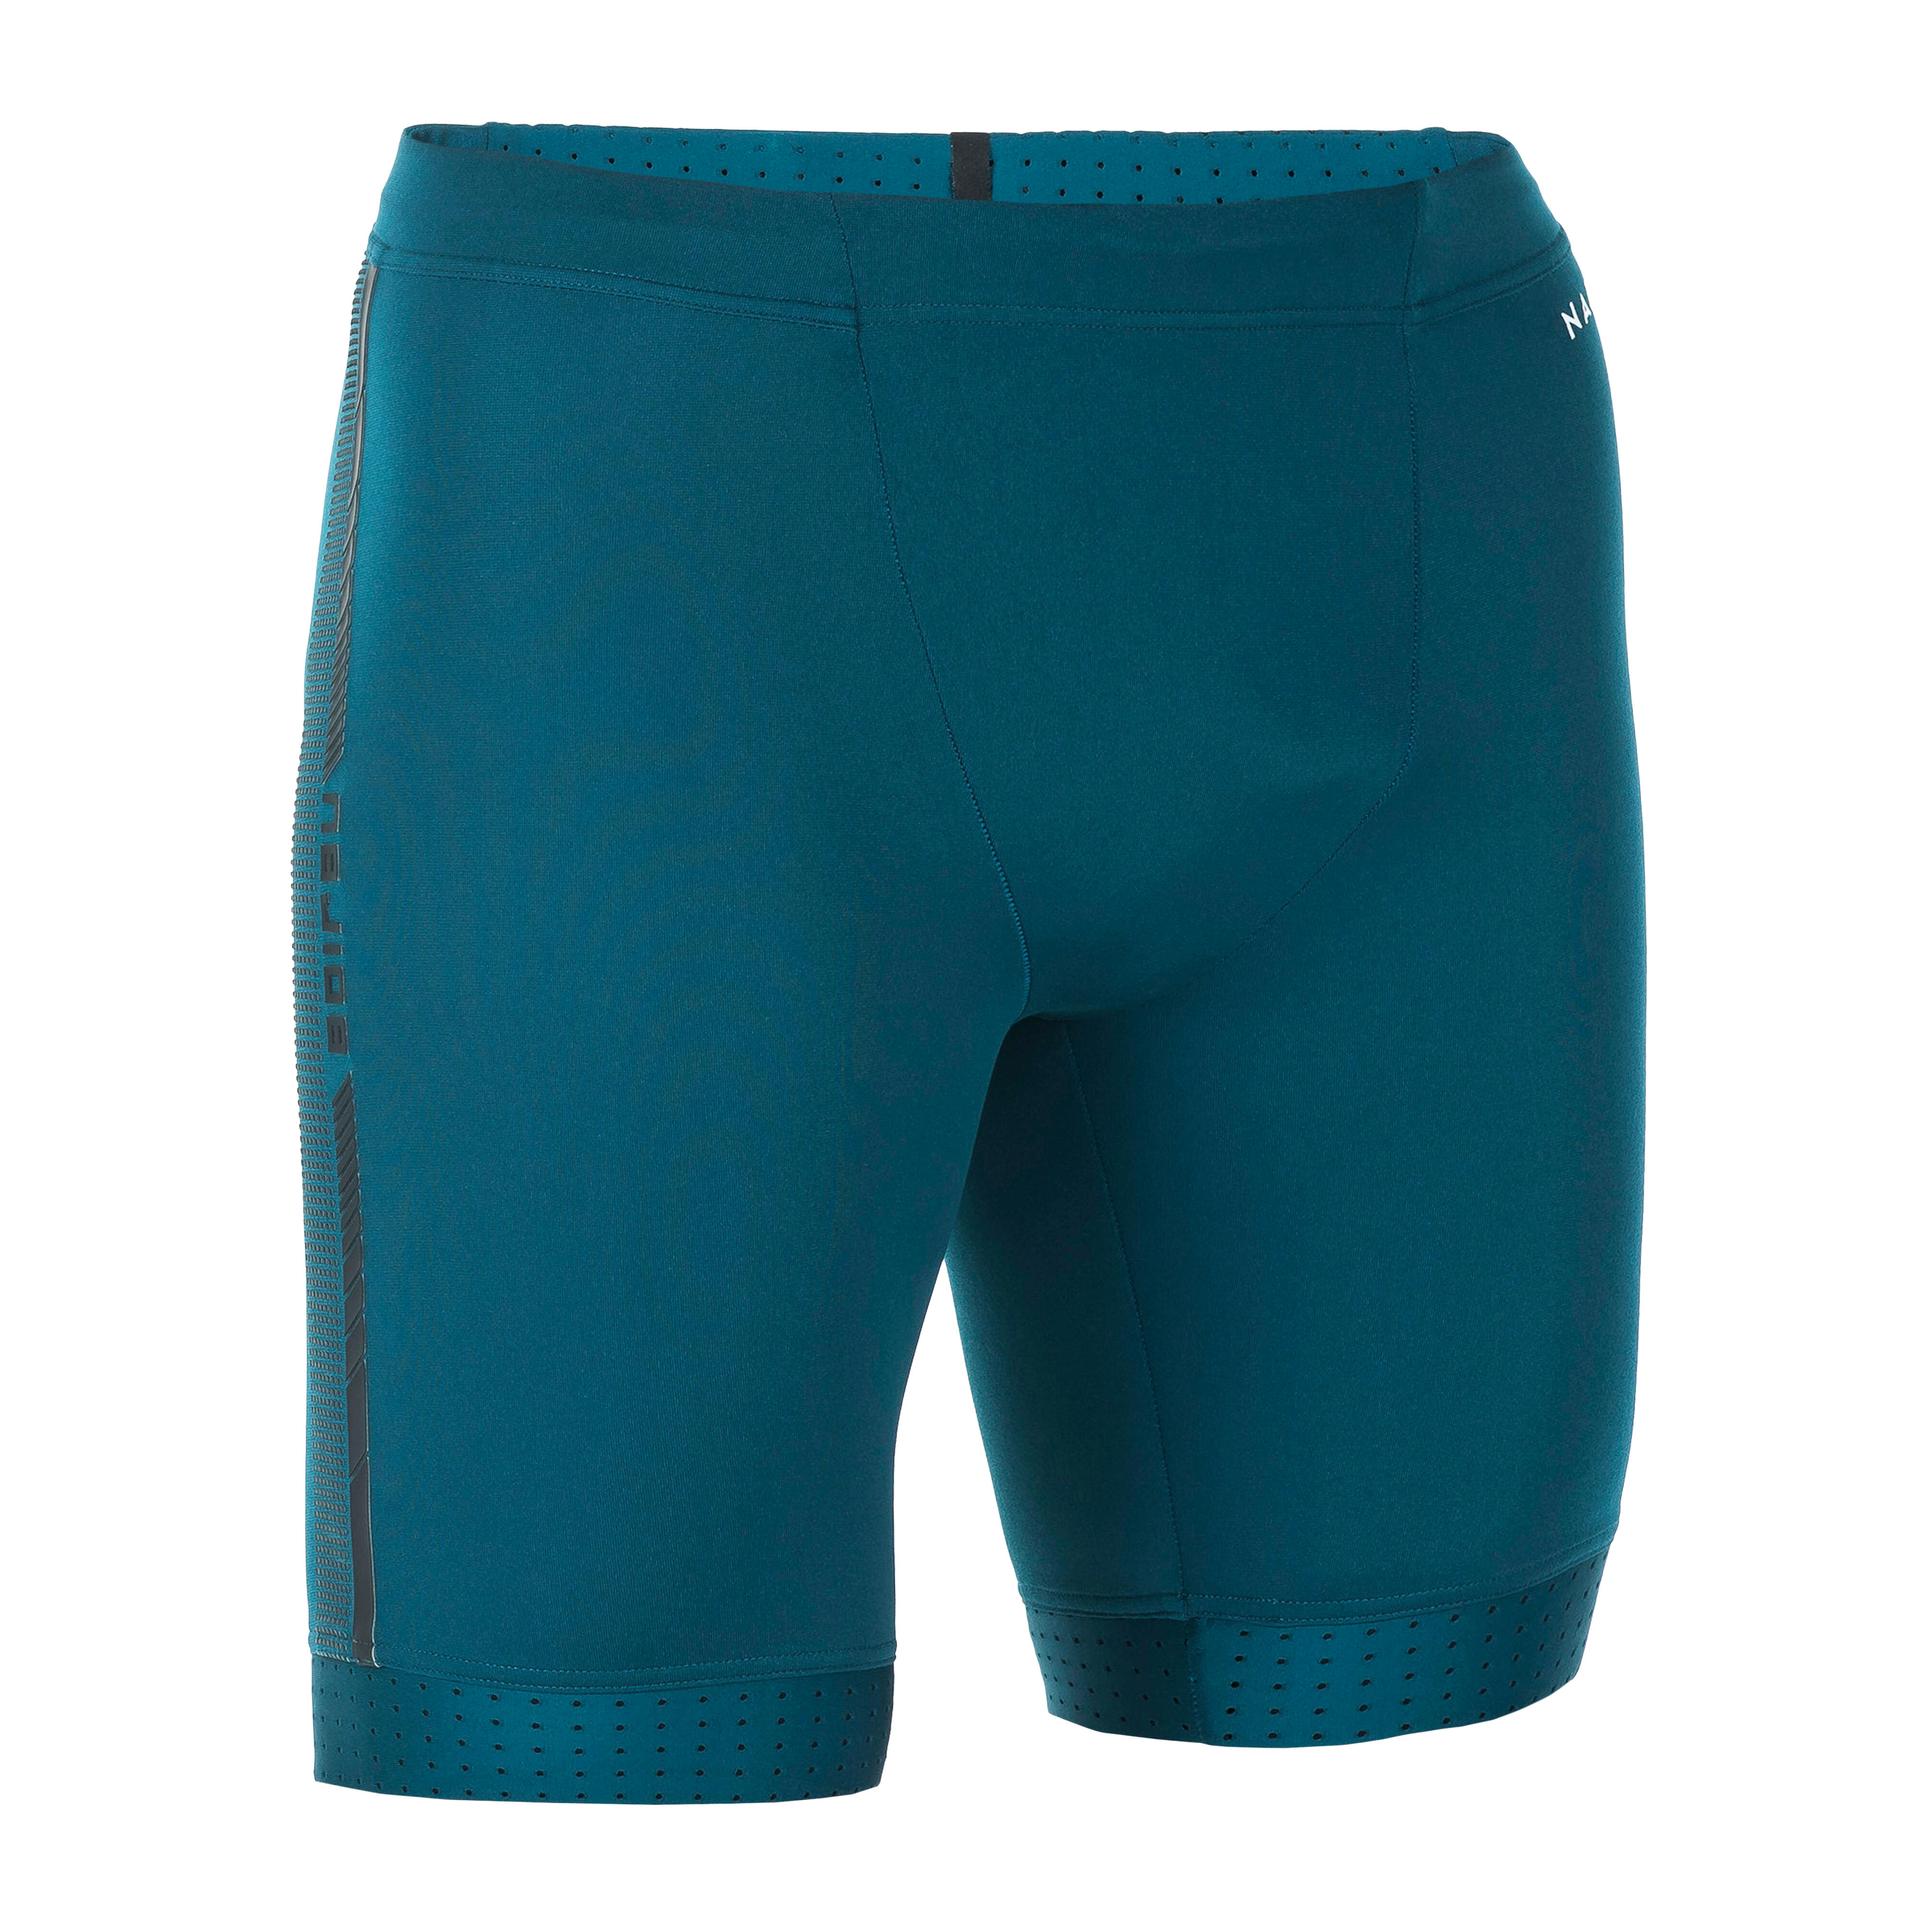 Men Swimming Jammer with inner mesh lining Turquoise